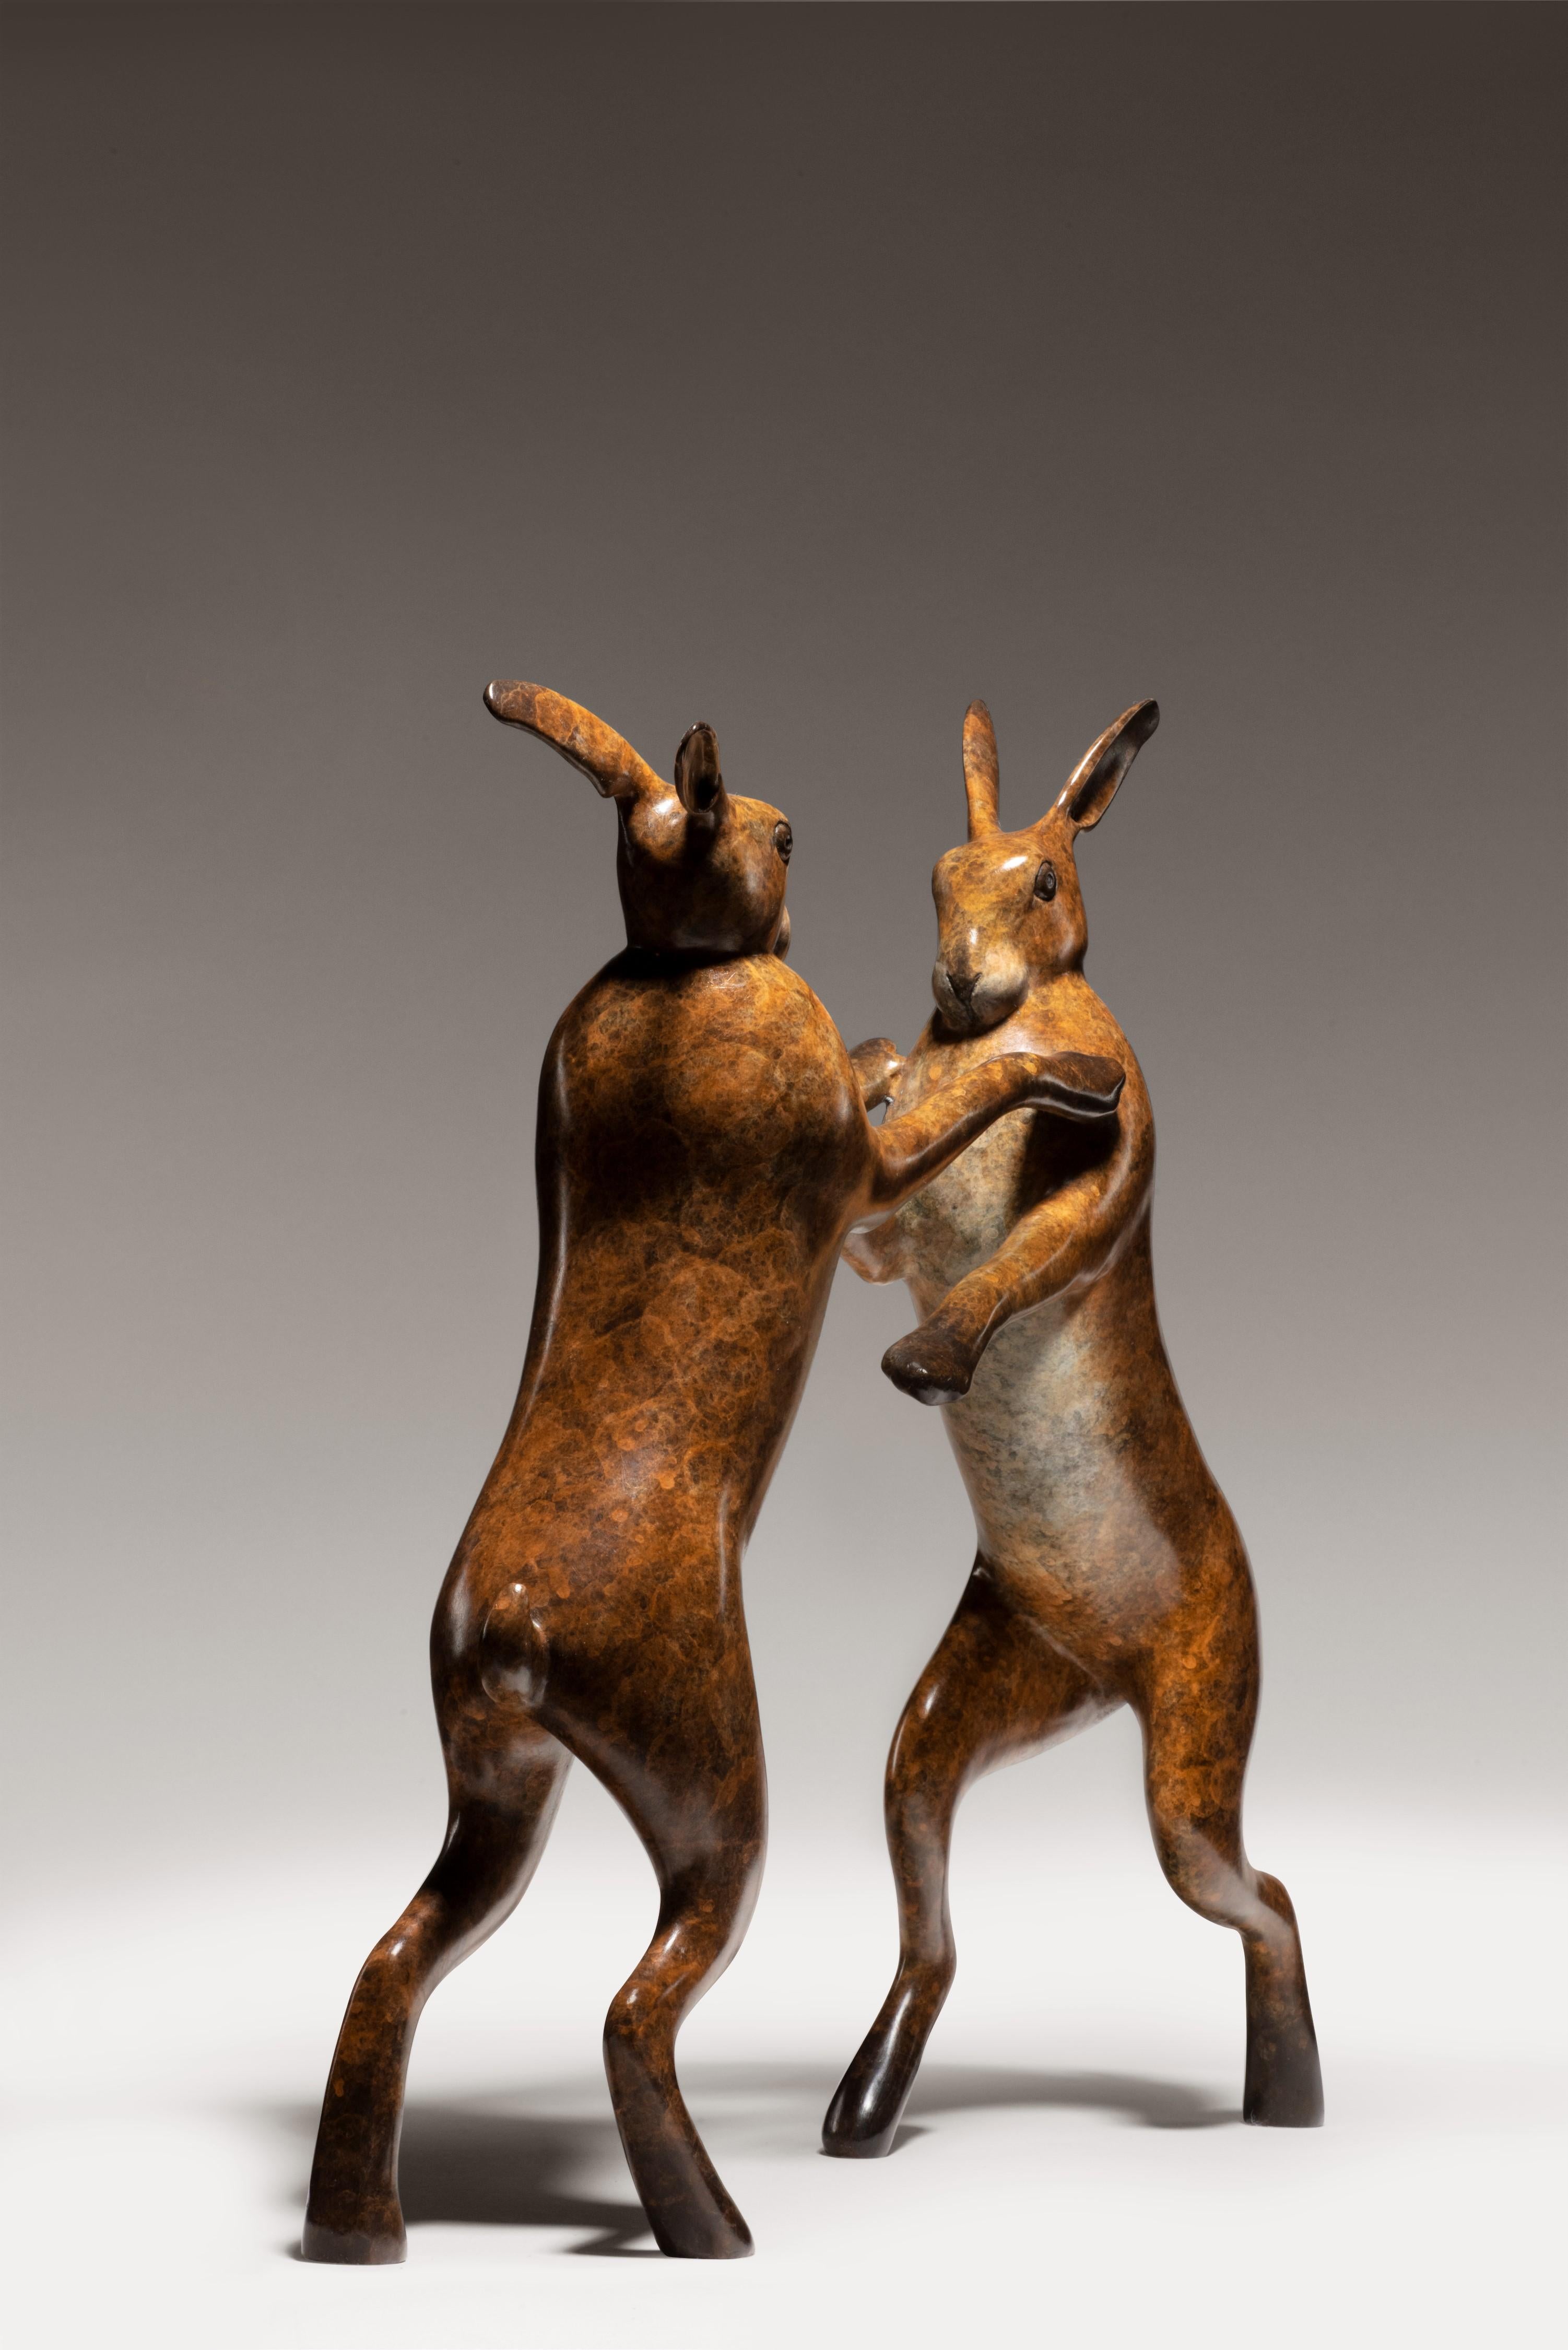 'Boxing Hares' is a stunningly elegant Bronze sculpture. Richard Smith conveys so much character in such simple lines, exemplifying a truly wonderful talent. The fantastic richly detailed graduated Brown Patina really adds to the depth of the